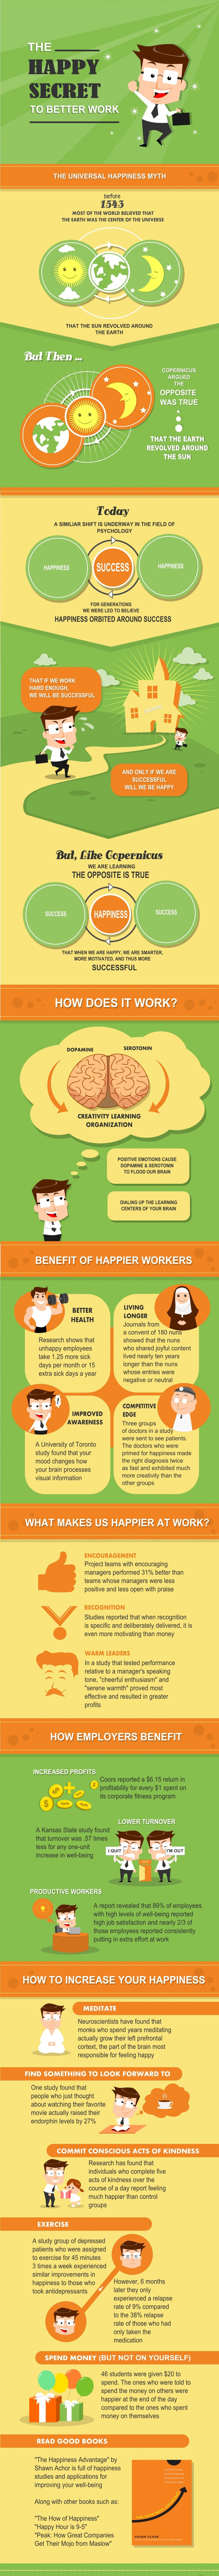 the-happy-secret-to-better-work